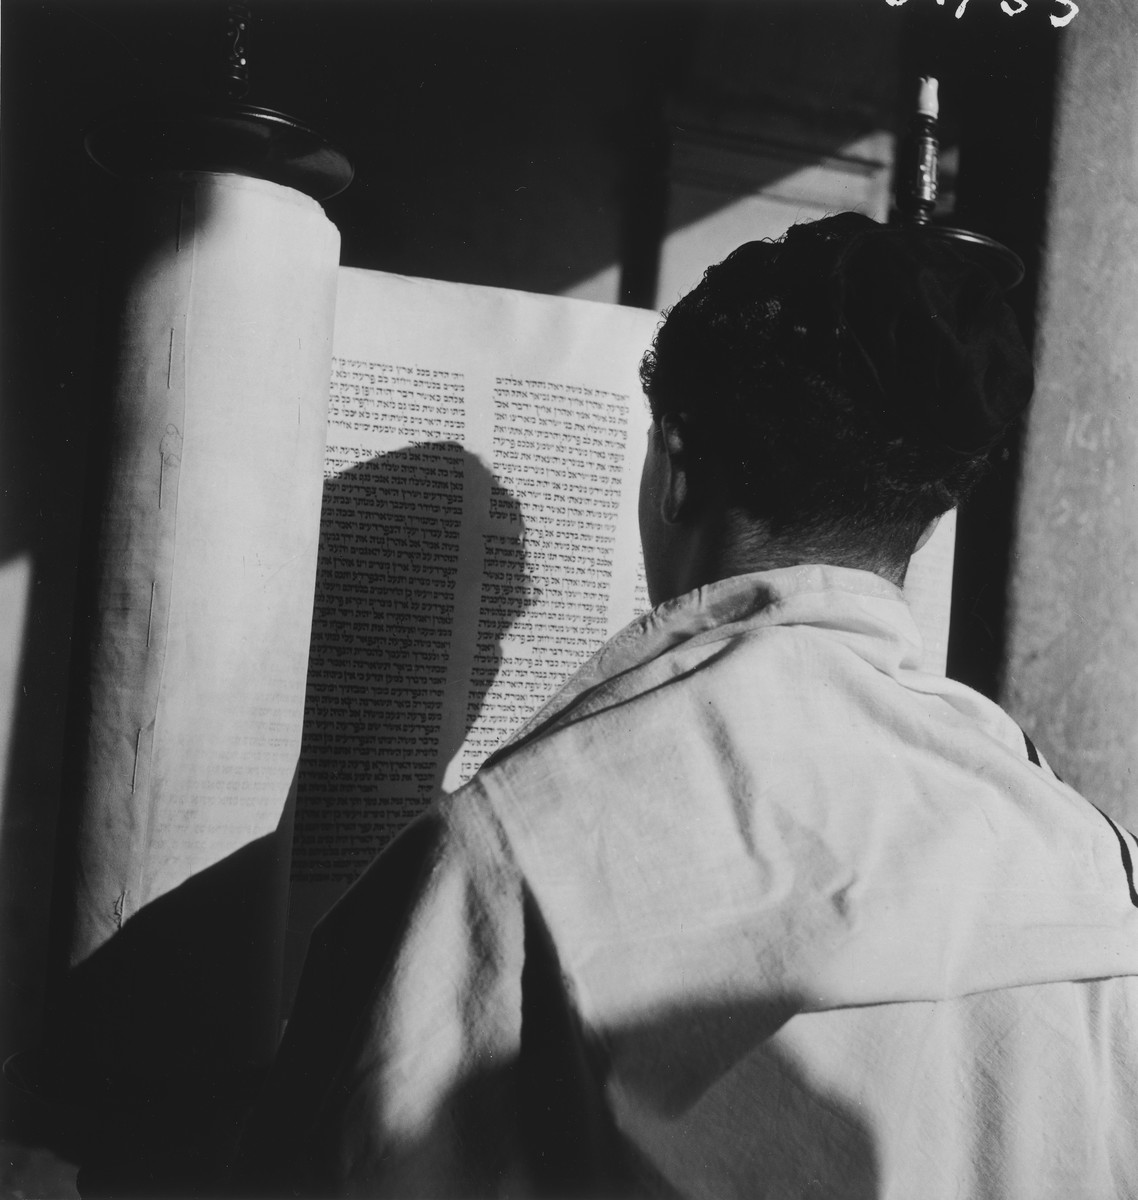 A teenager wrapped in a prayer shawl lifts up the torah scroll during religious services in an unidentified post-war OSE children's home.